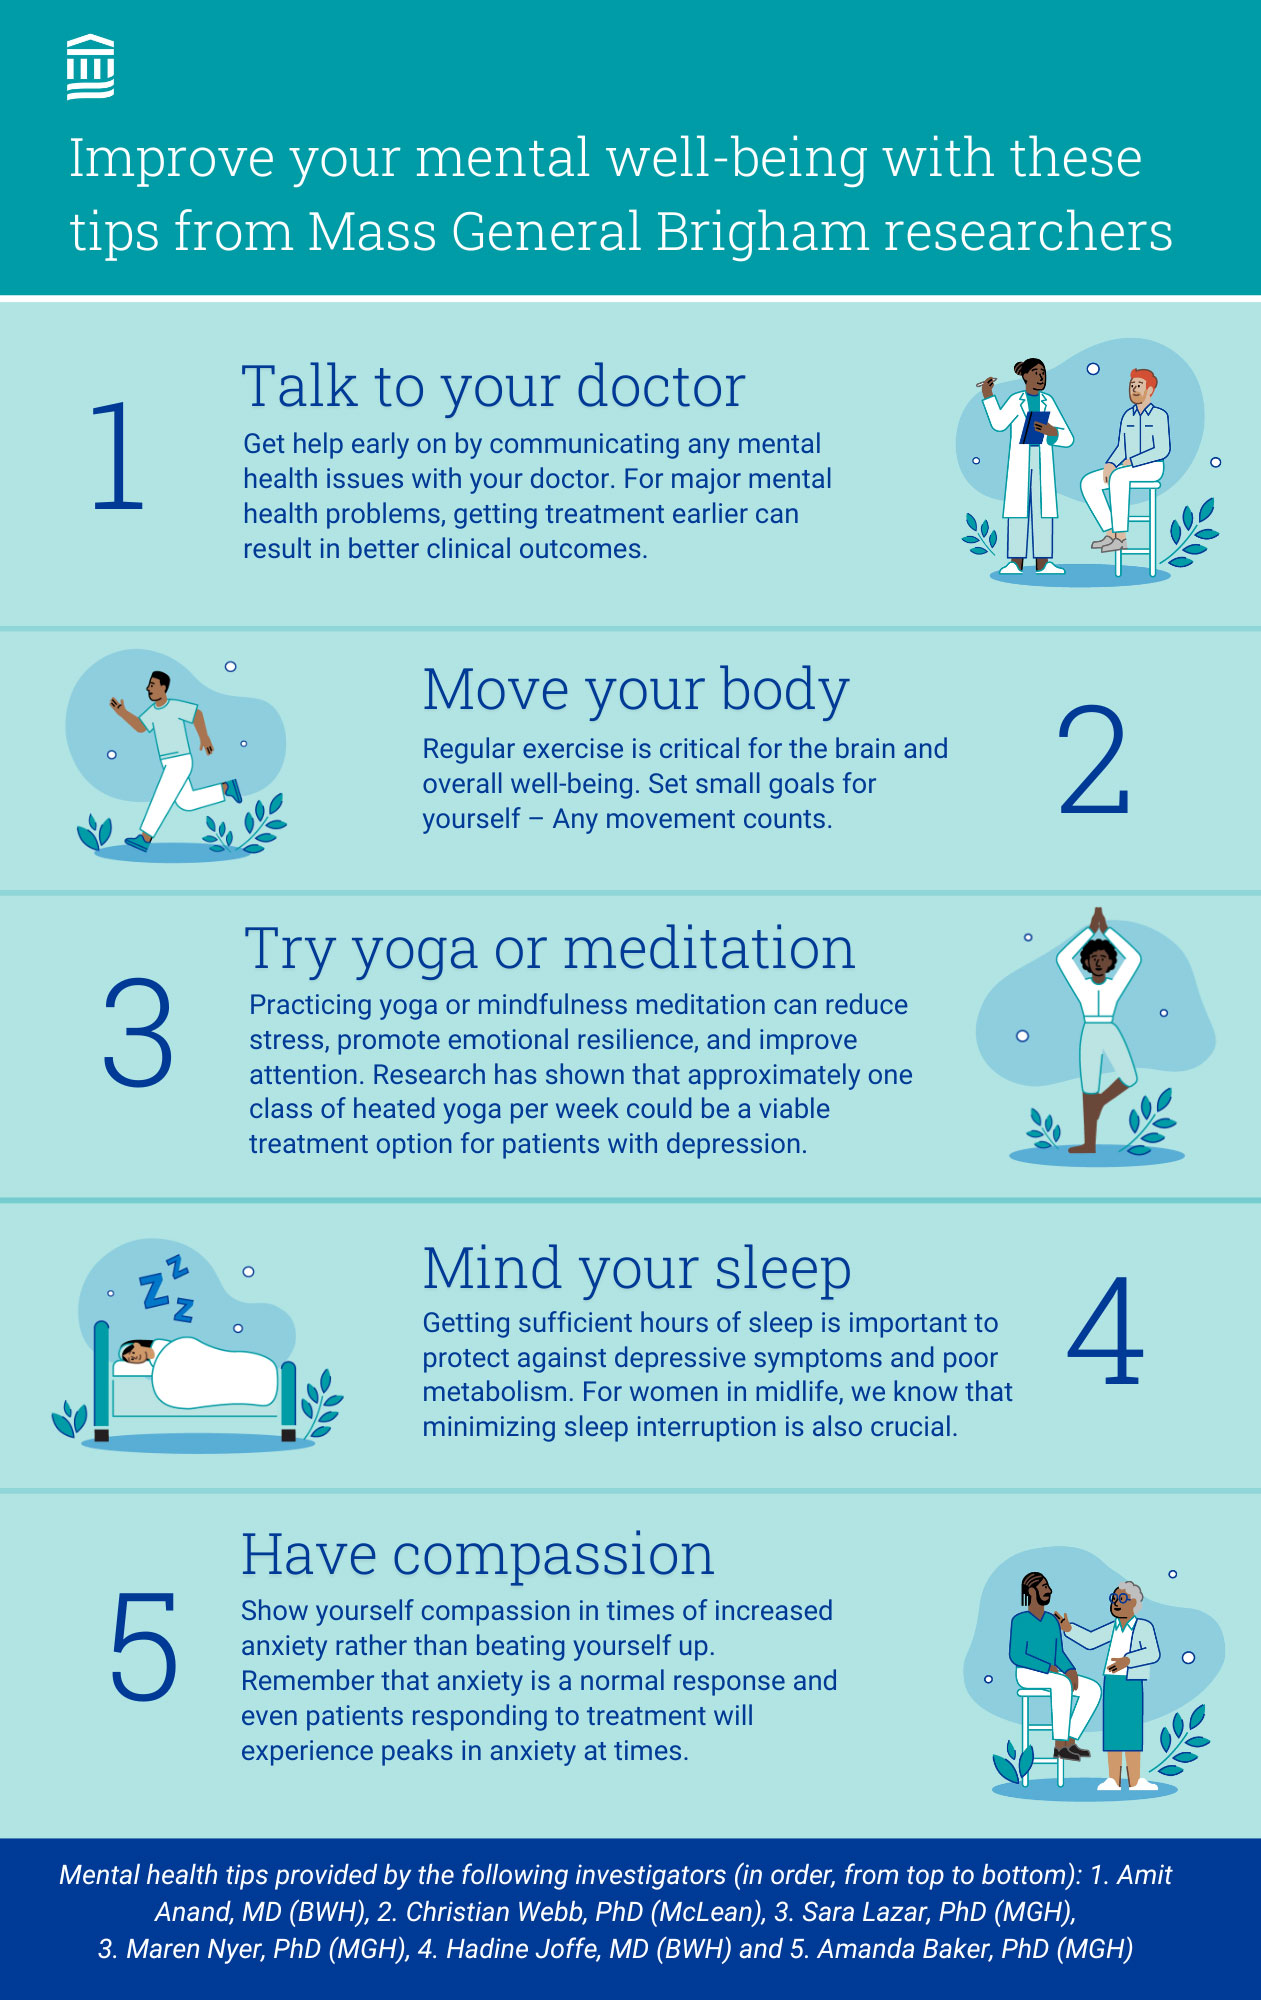 An infographic that says, Improve your mental well-being with these tips from Mass General Brigham researchers: 1. Talk to your doctor. 2. Move your body. 3. Try yoga or meditation. 4. Mind your sleep. 5. Have compassion.